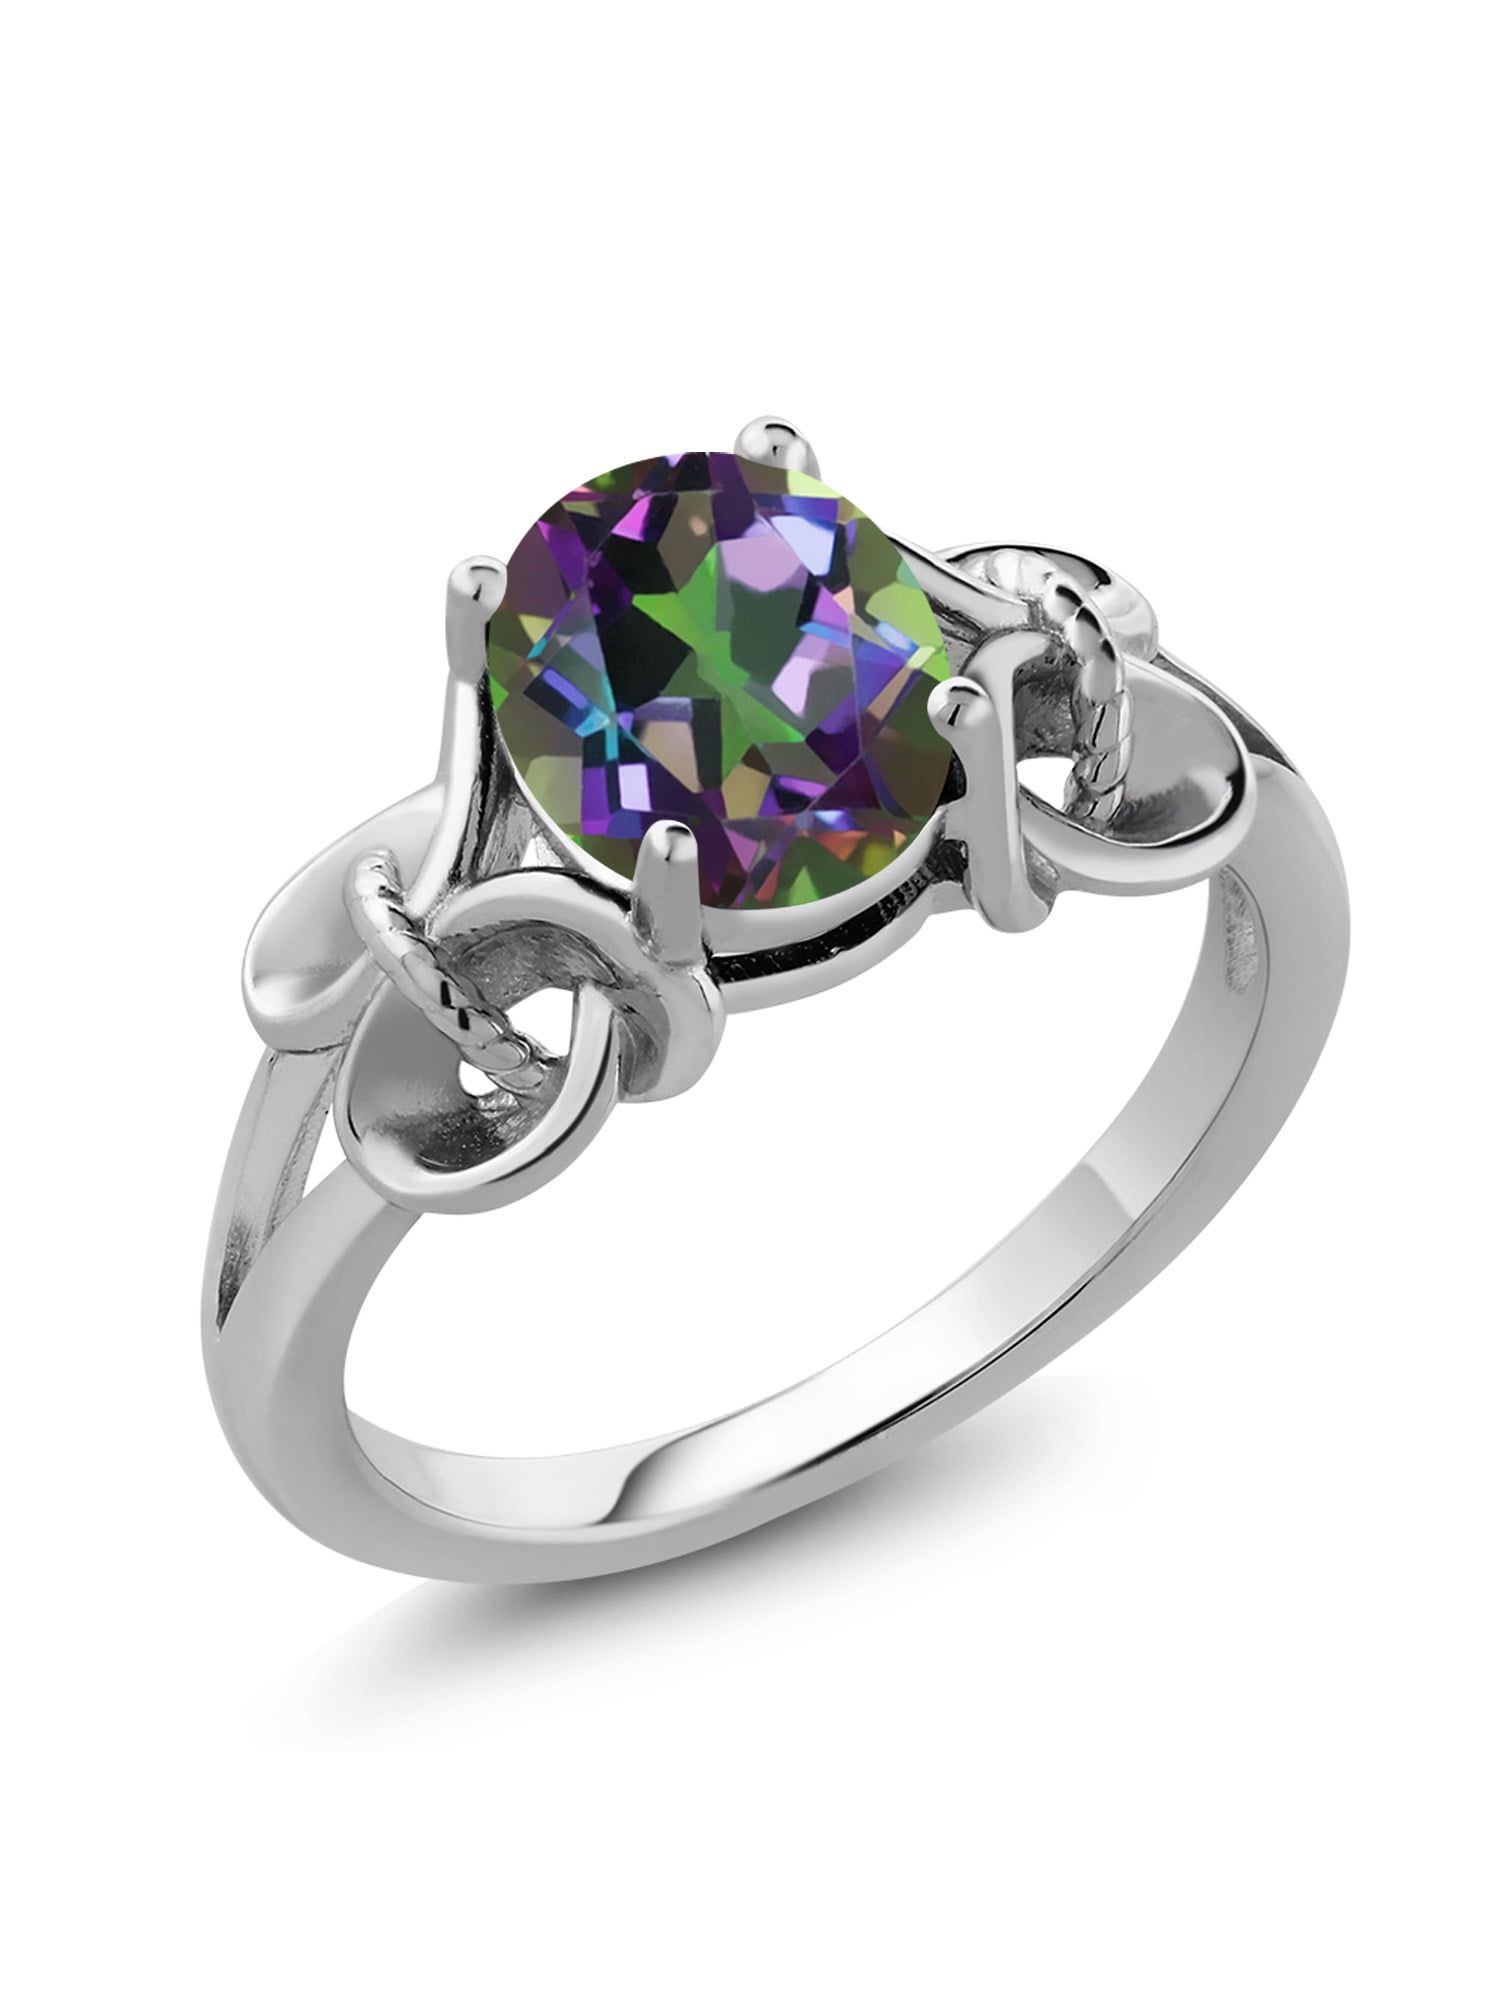 Gem Stone King 1.80 Ct Oval Green VS Mystic Topaz 925 Sterling Silver Mens Solitaire Ring 